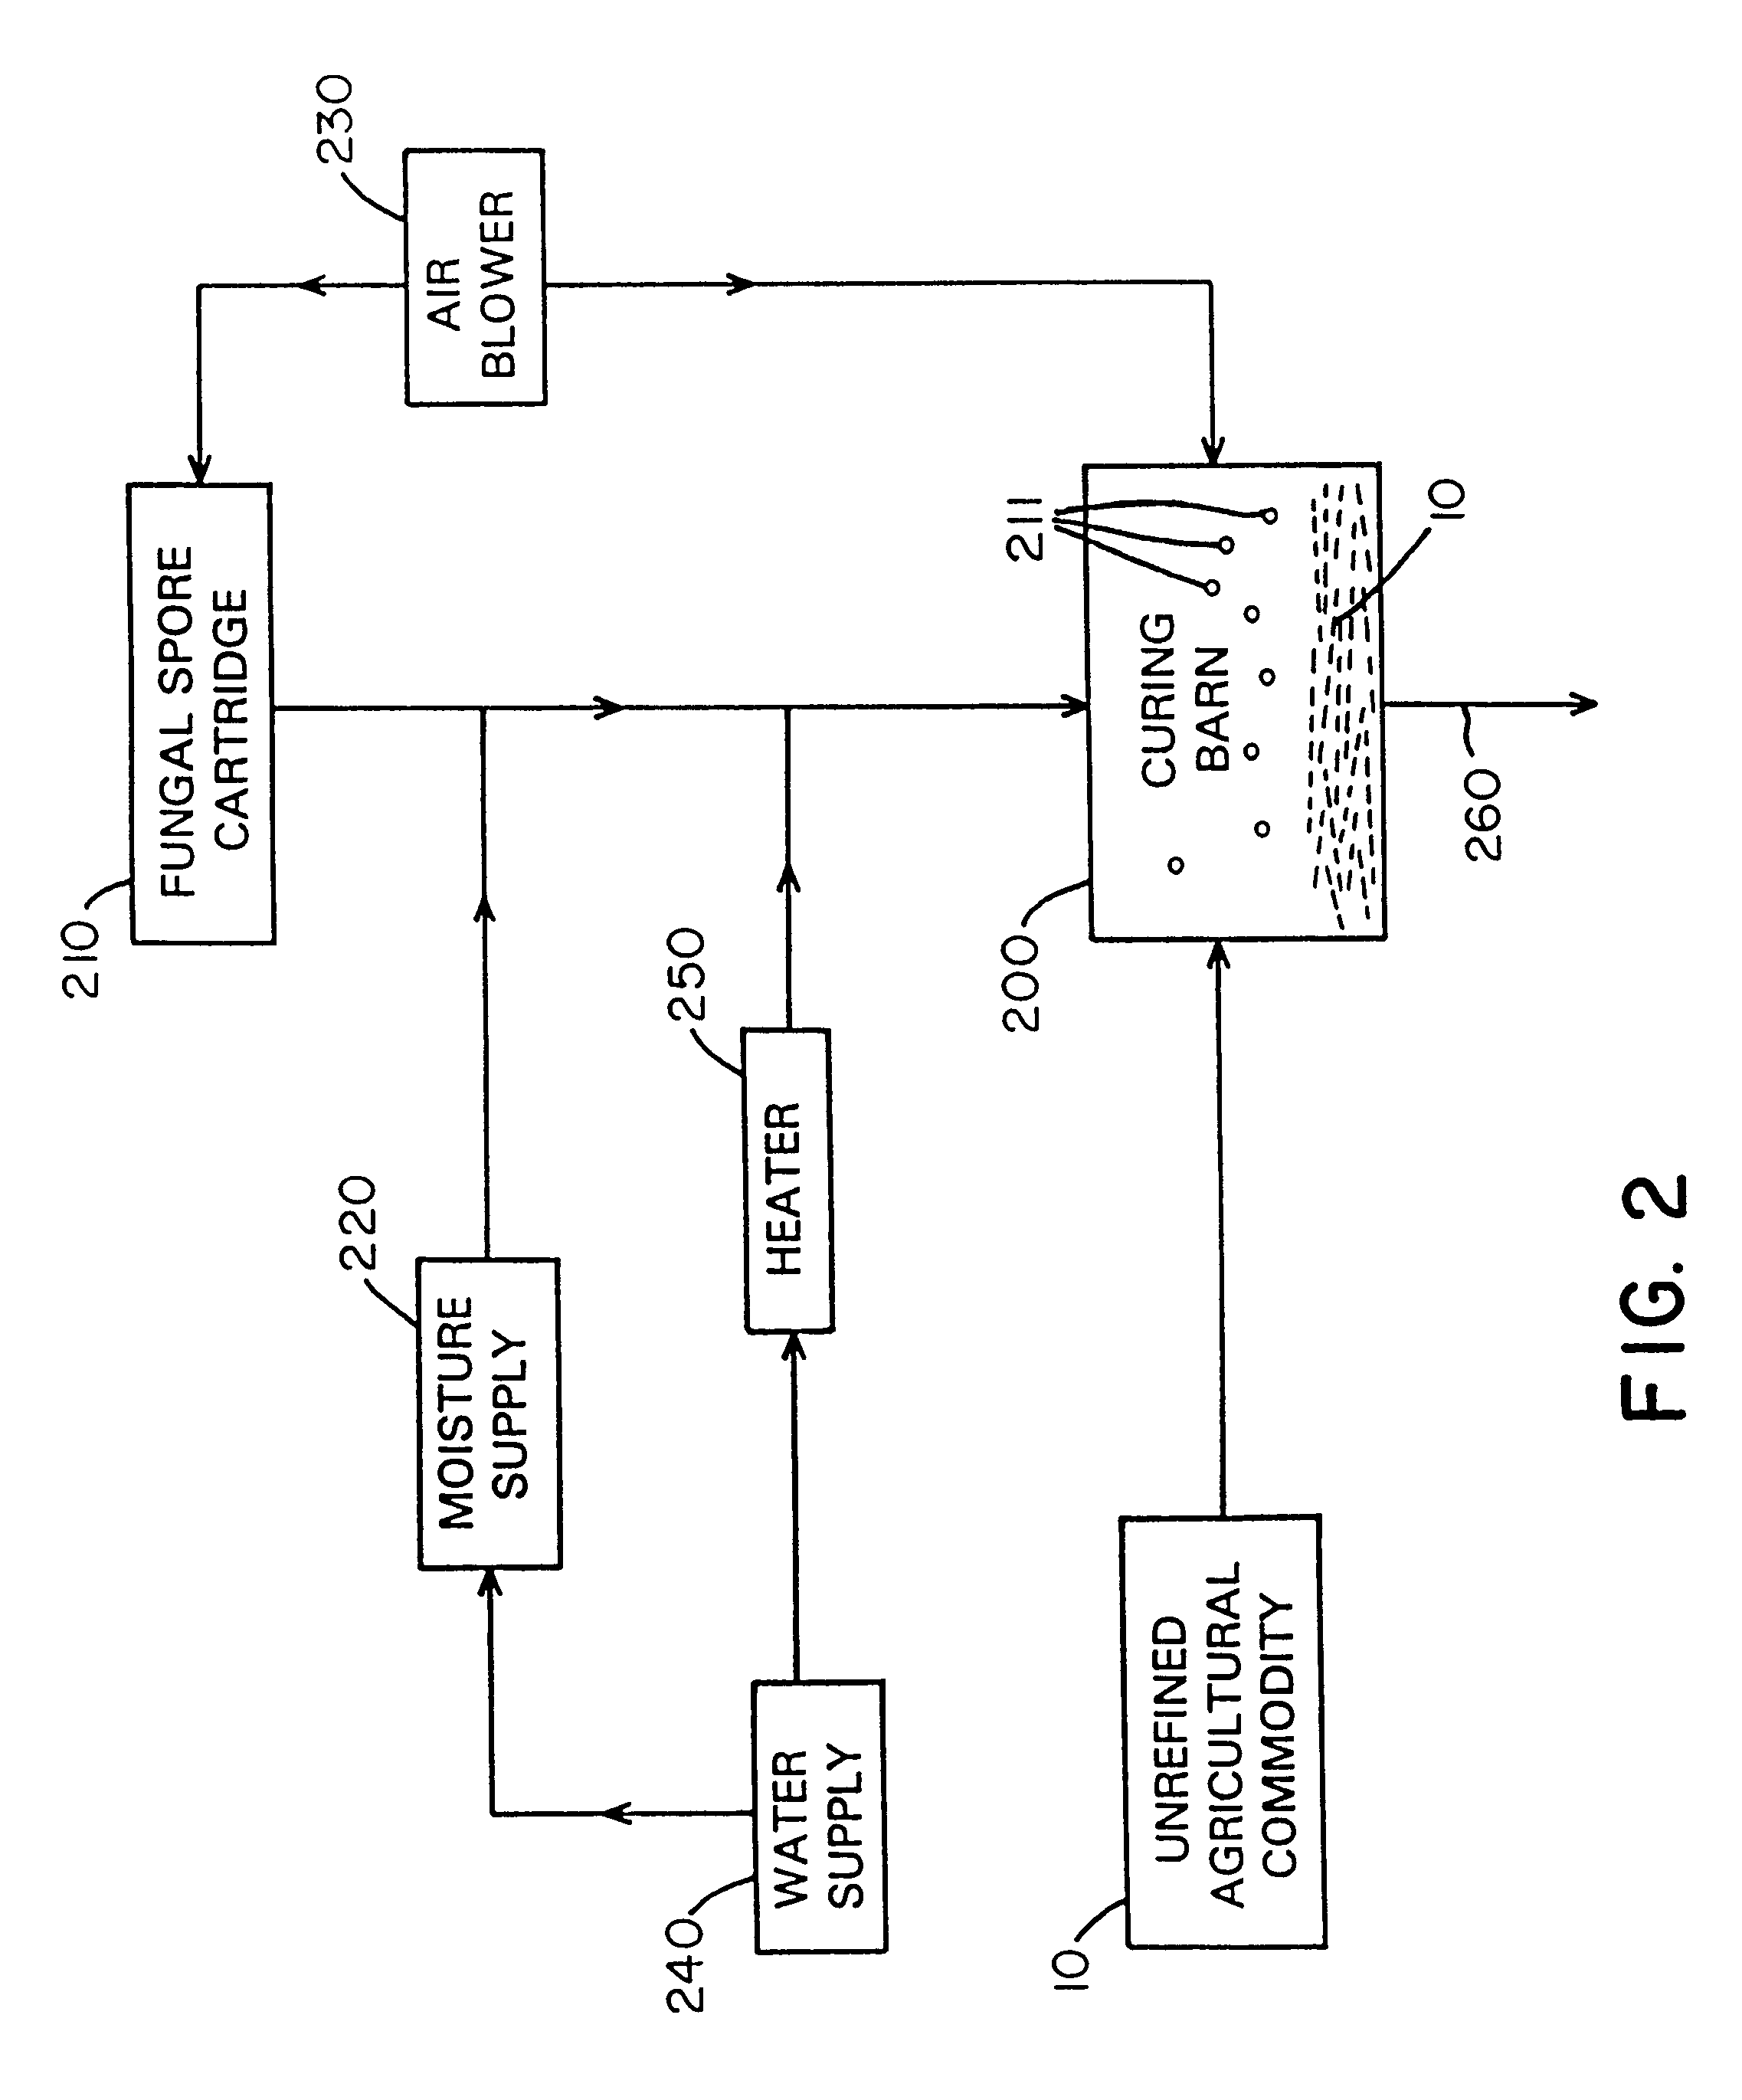 Method for assay and removal of harmful toxins during processing of tobacco products